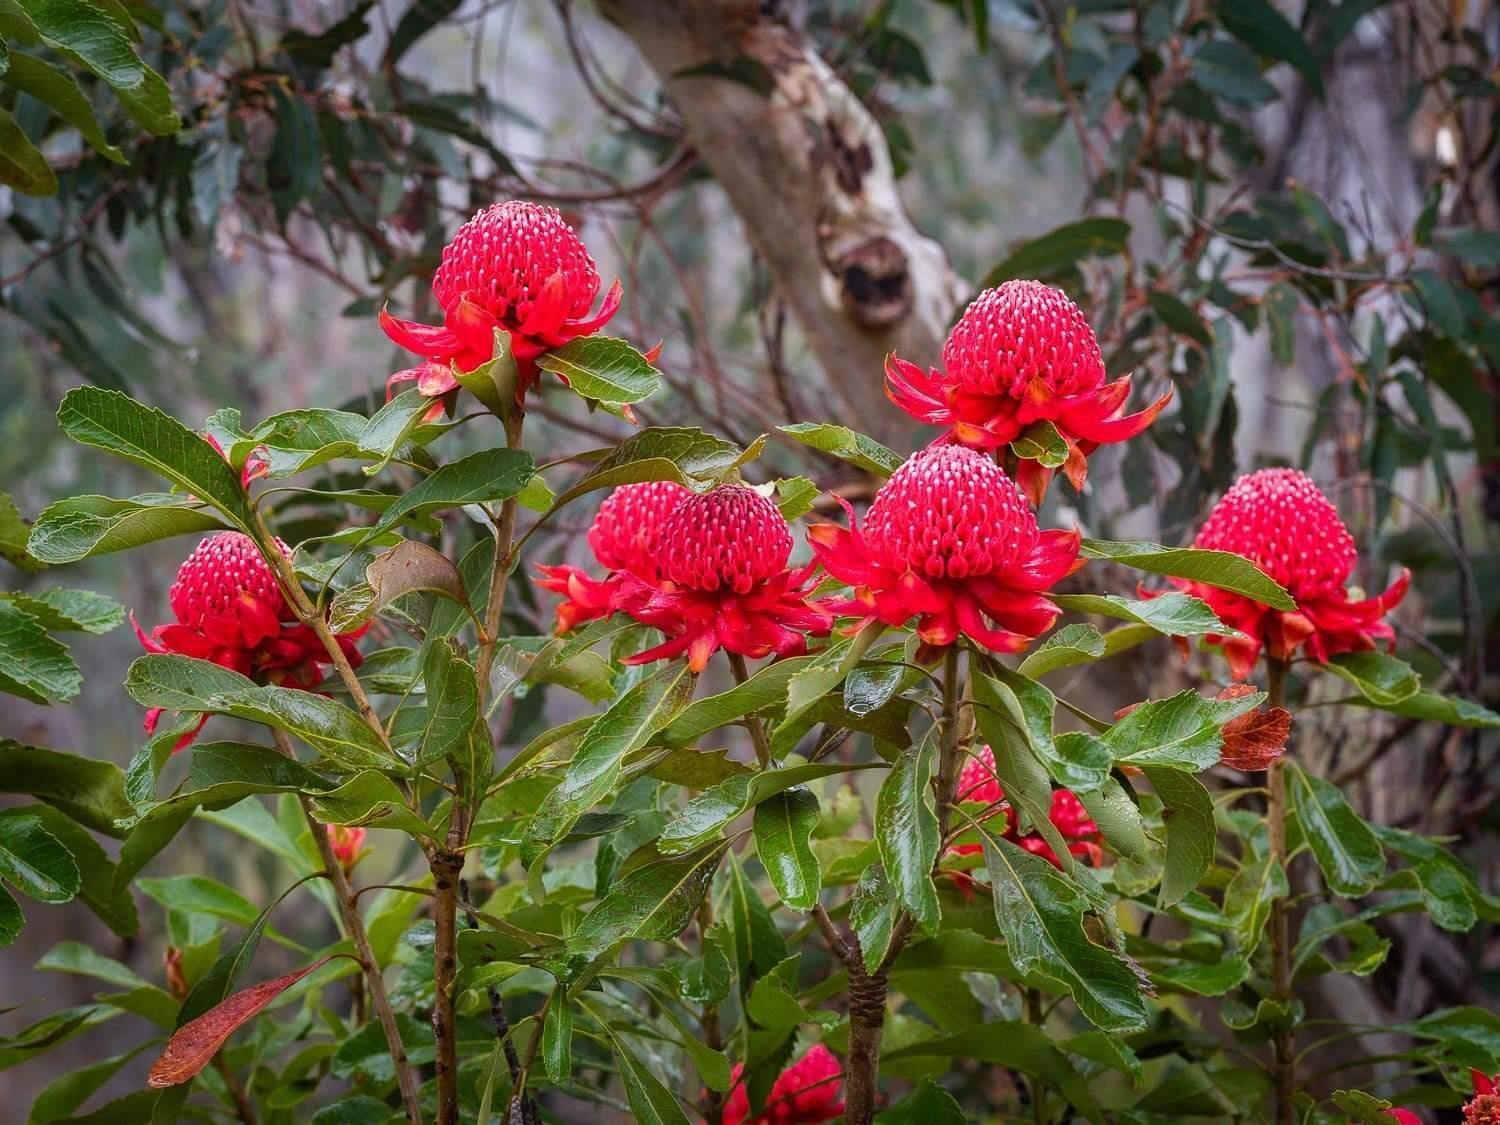 A group of strawberry flowers in a forest area, Flowering Waratahs - Blue Mountains NSW